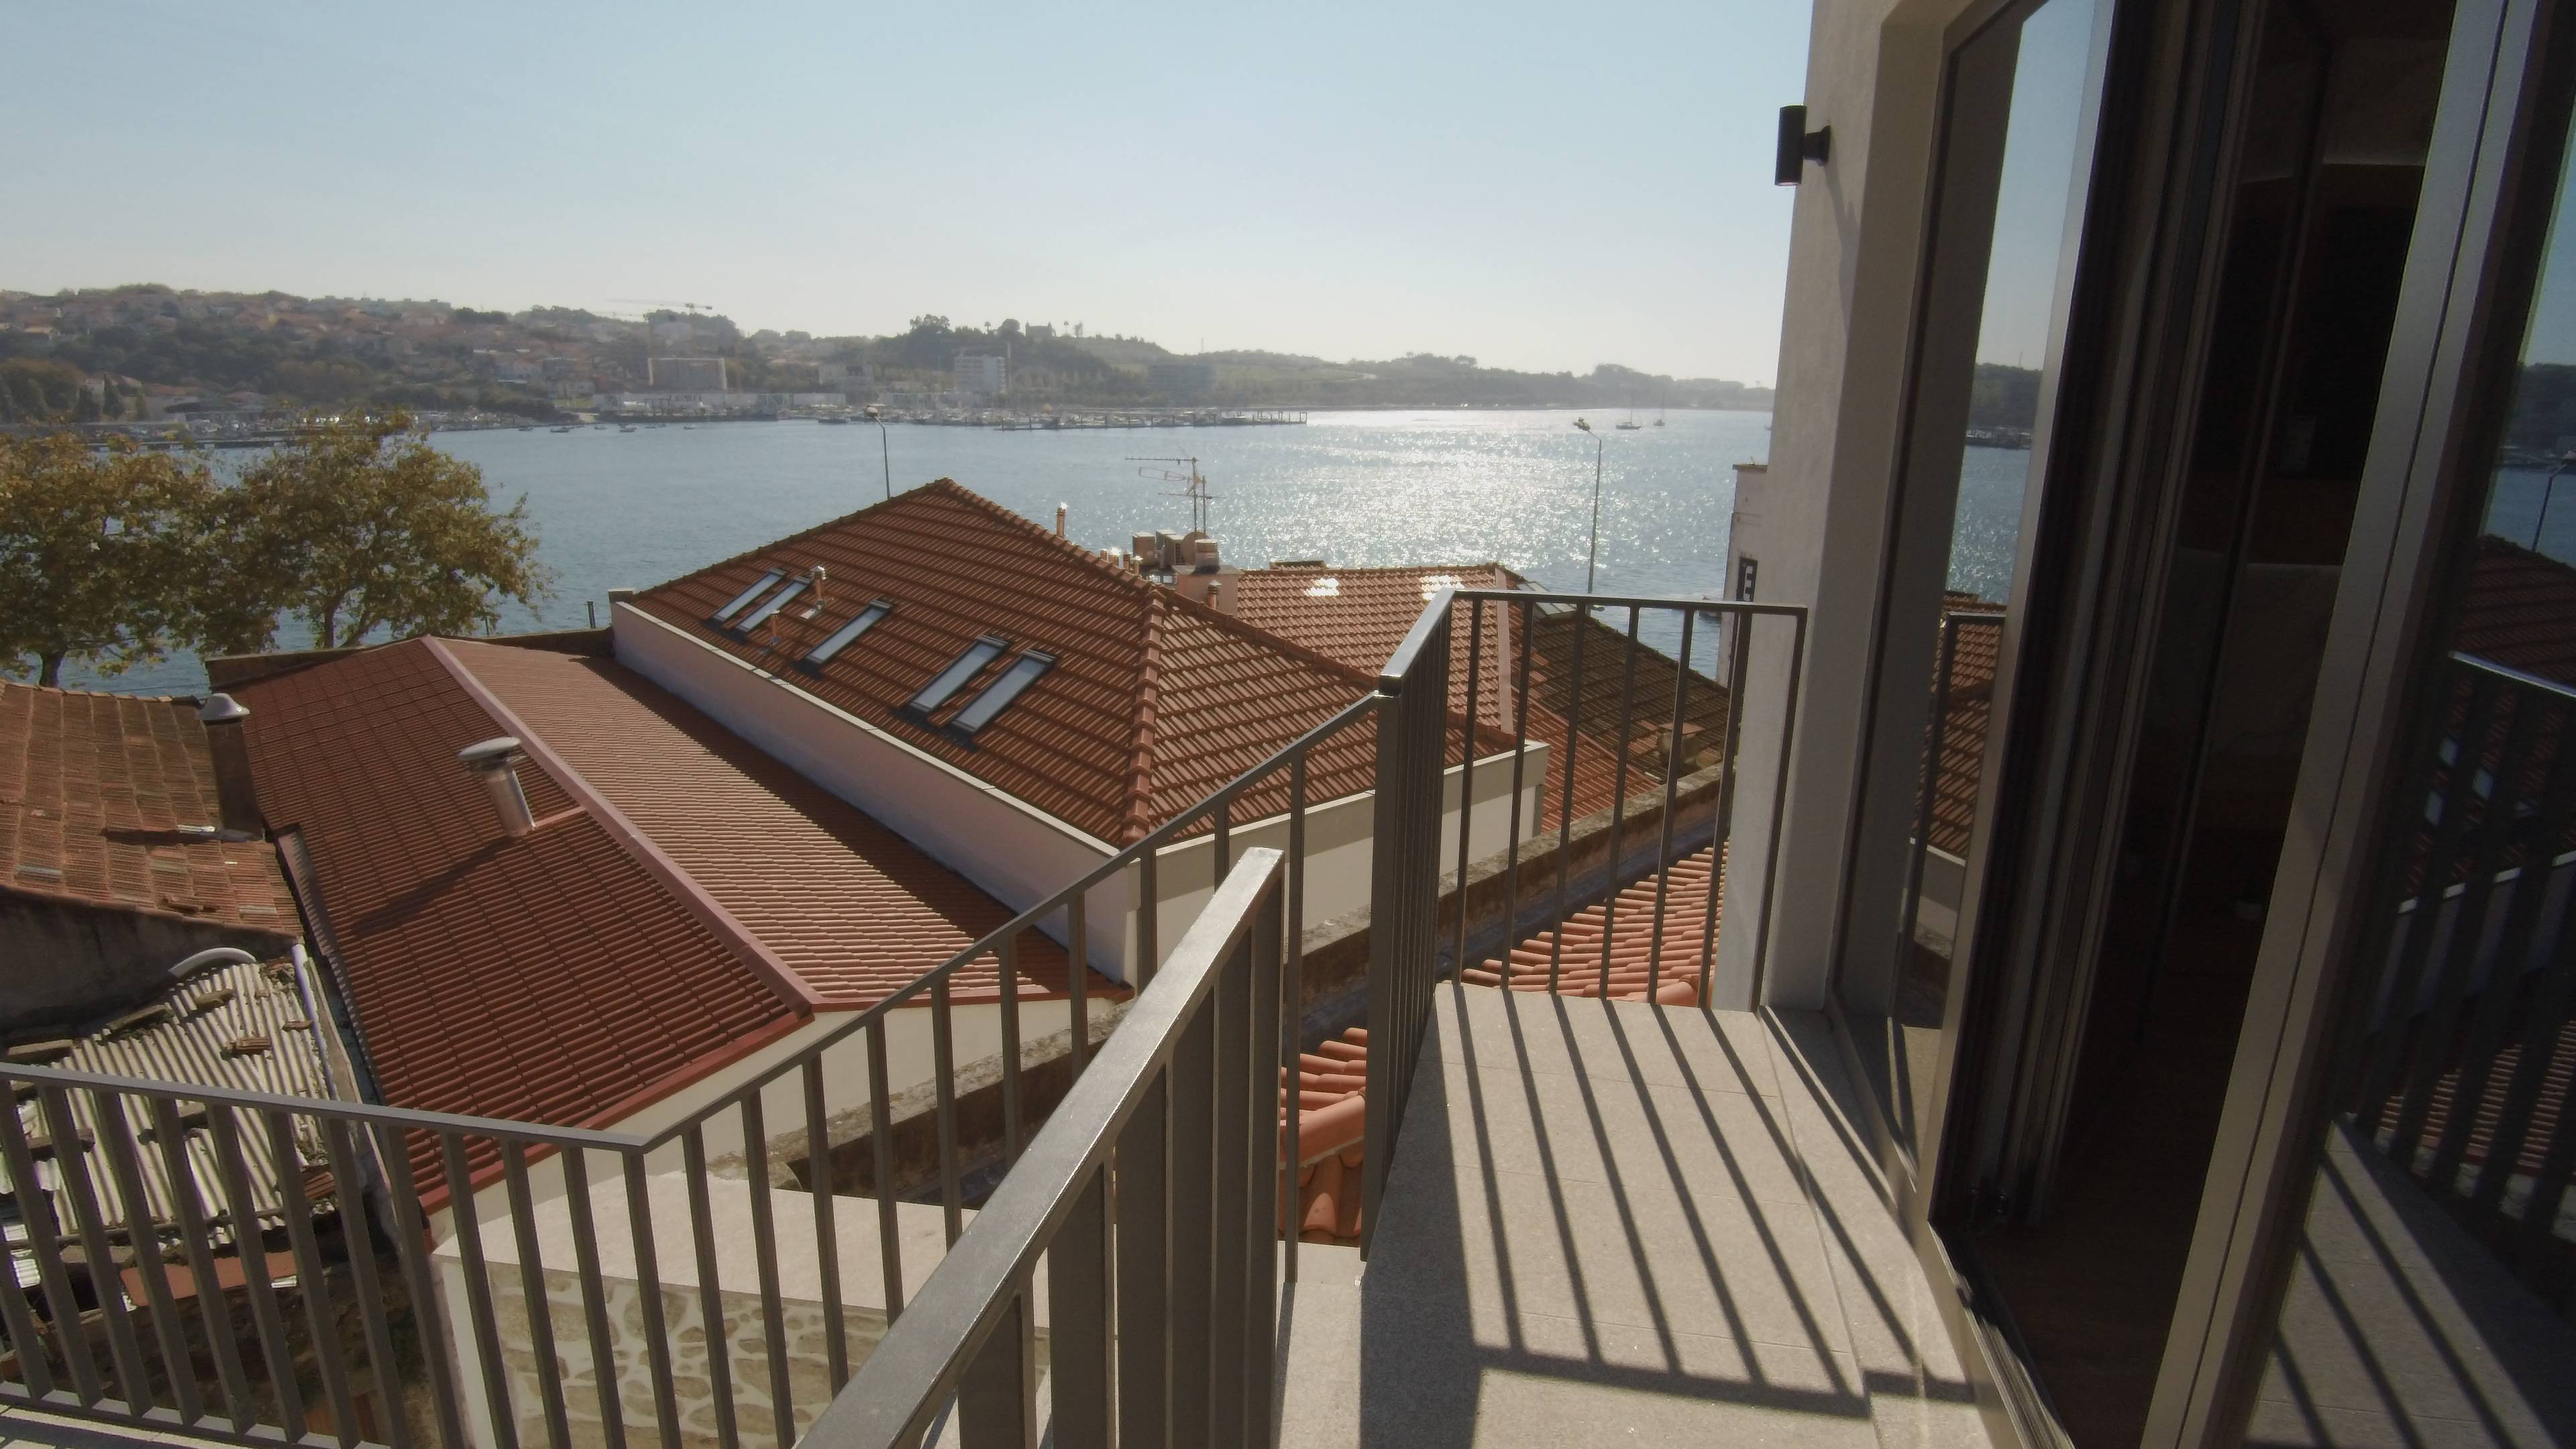 Breathtaking Views 3 Bedroom Duplex apartment in the most exclusive parish of Porto, Portugal with a great yield per year